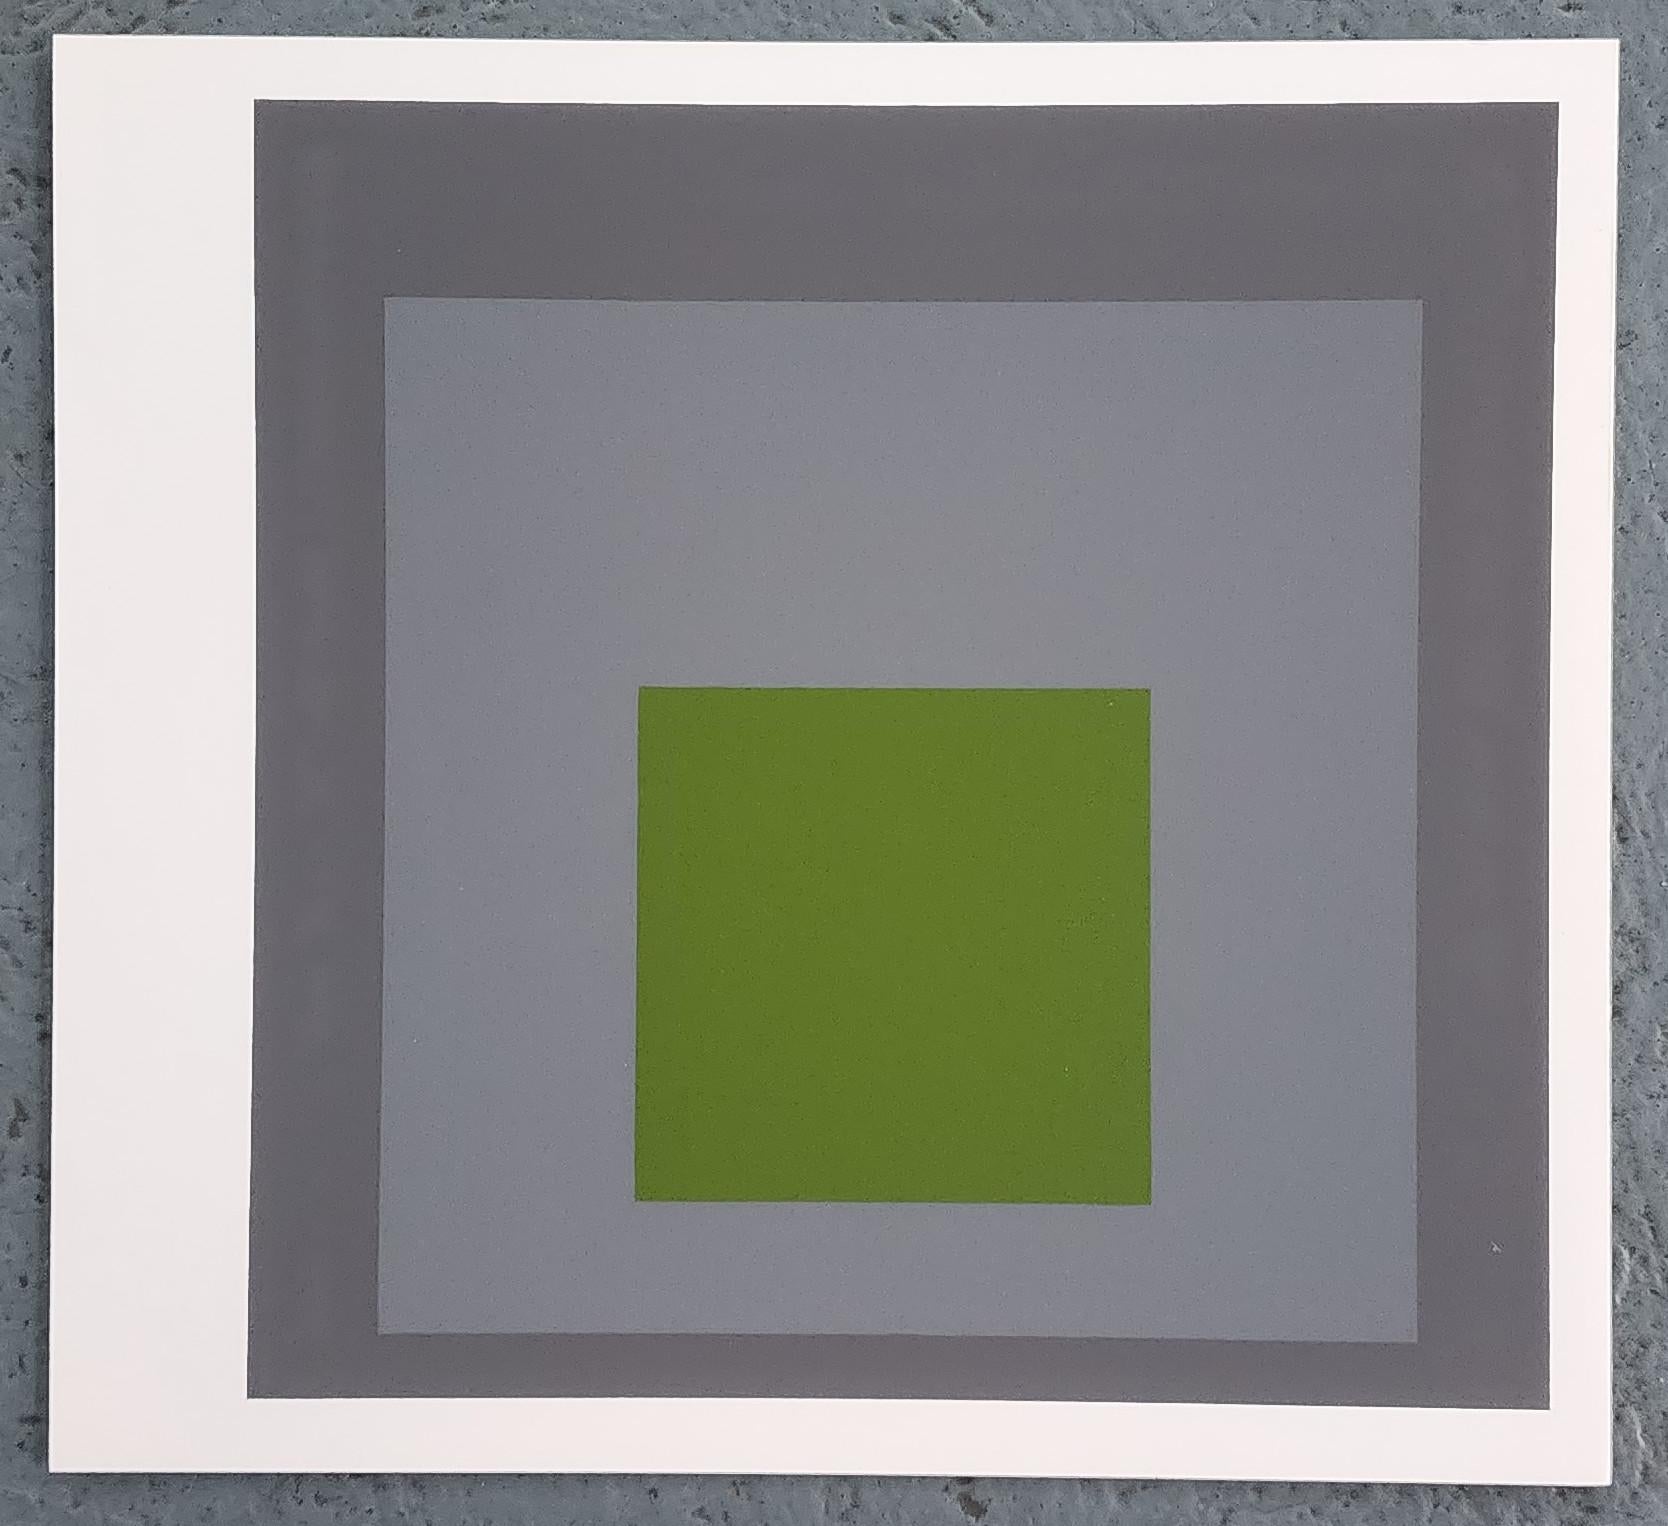 Josef Albers
Homage to the Square: Thaw (from 